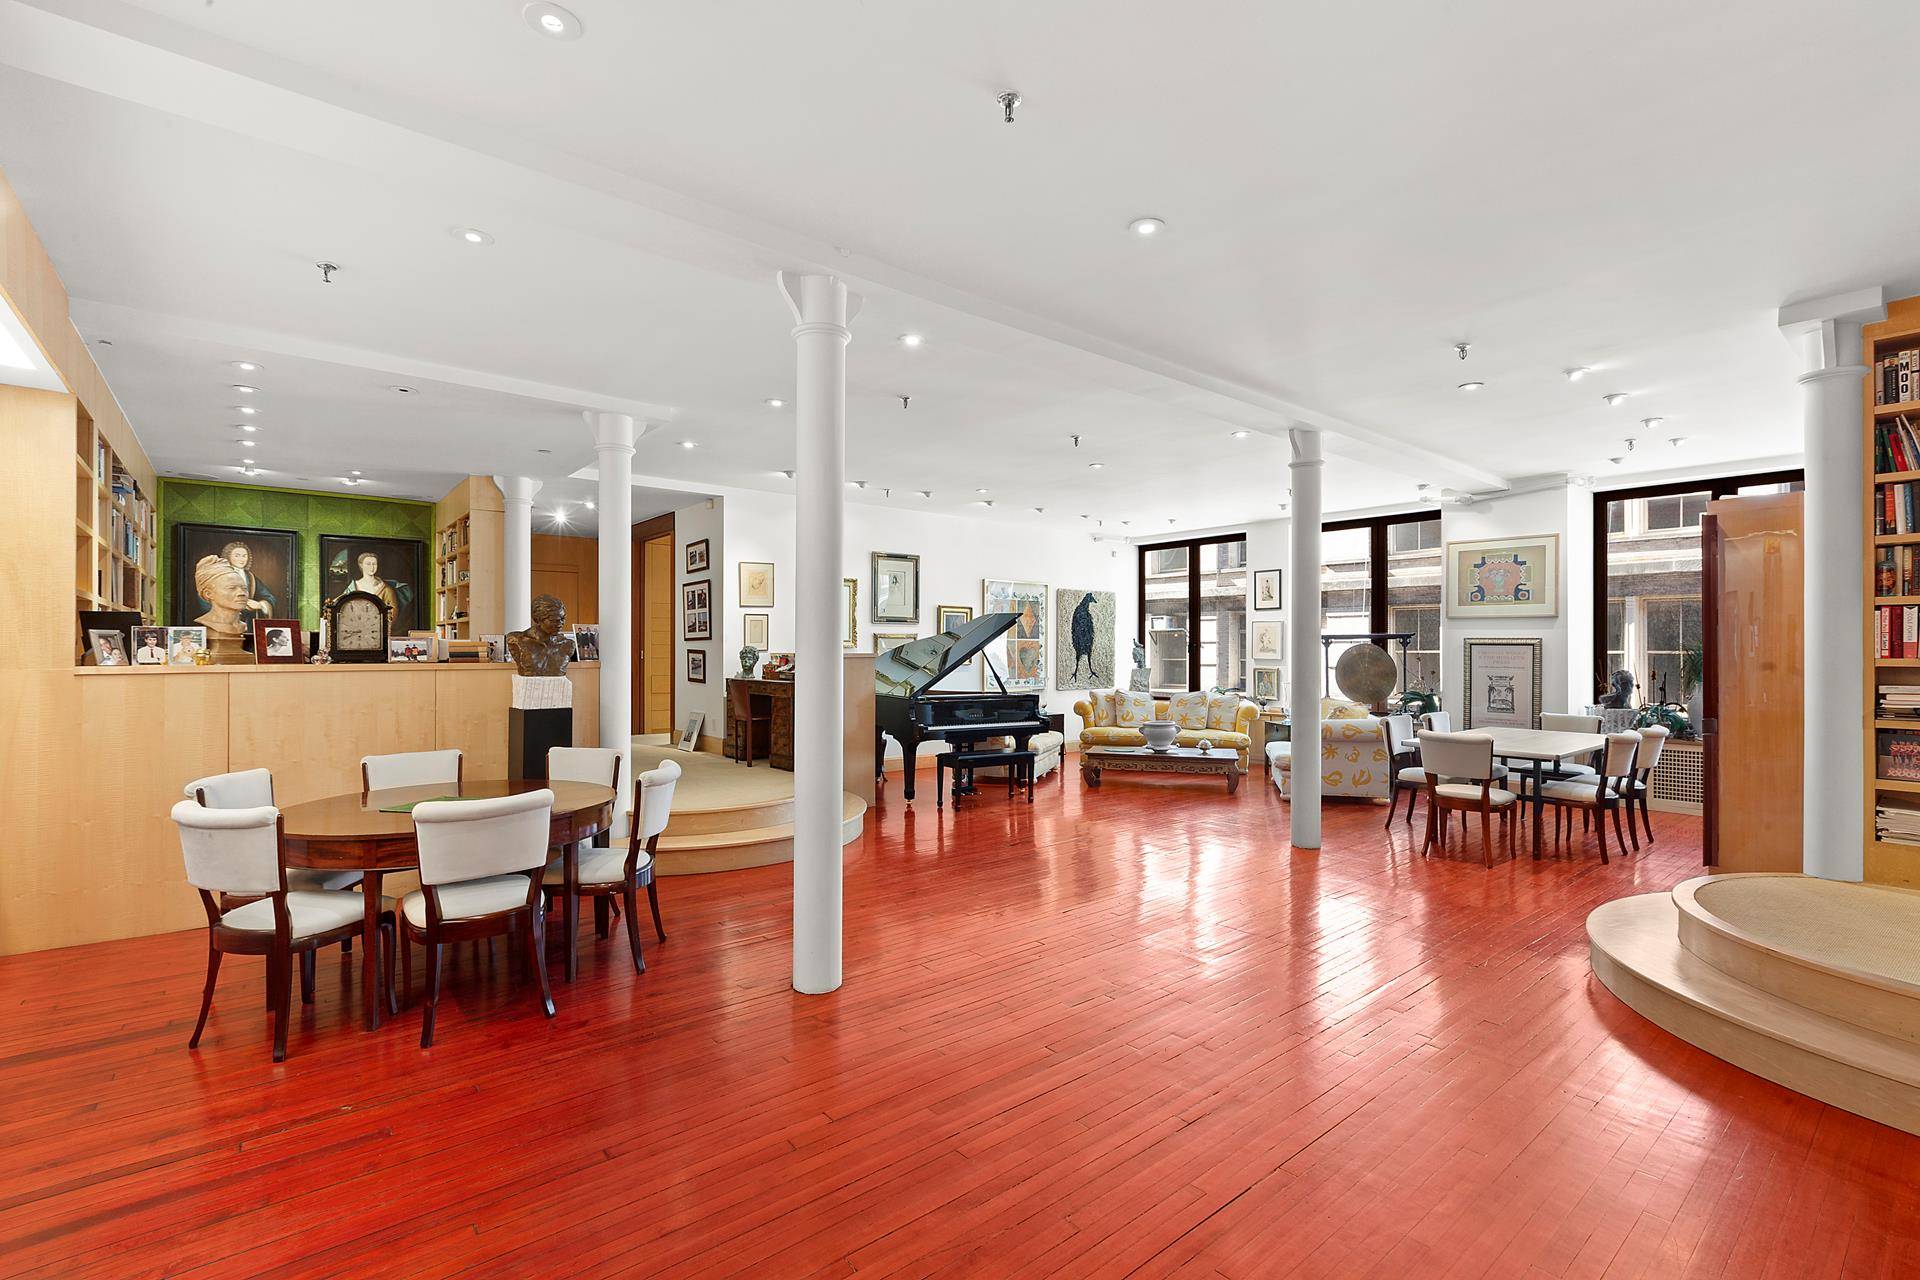 This classic fourth floor Loft has been lived in, worked in and loved for 20 years.